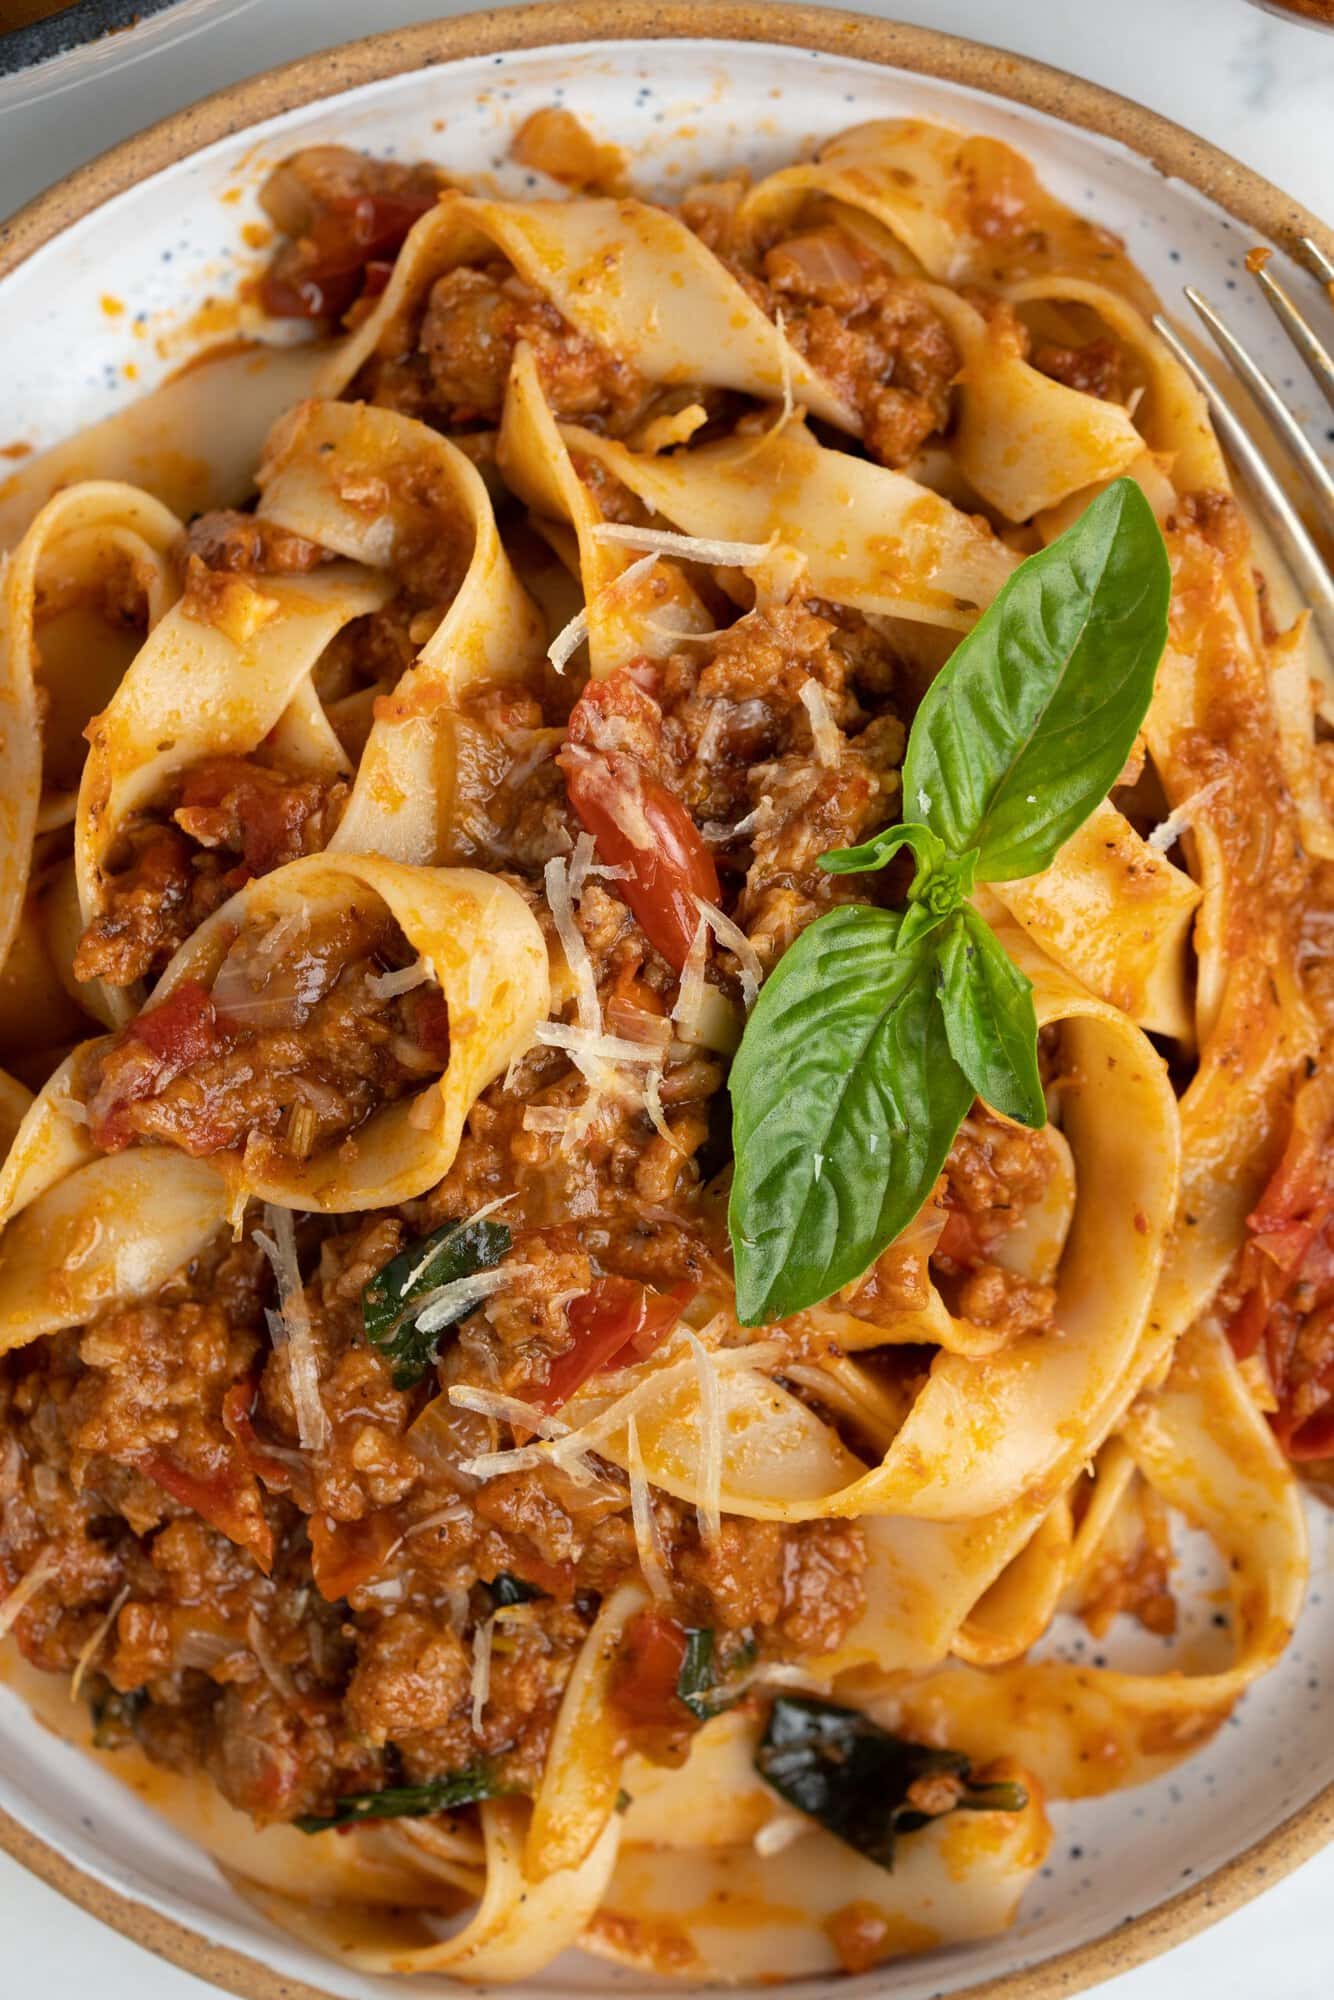 Pappardelle pasta in a hearty tomato based Italian sausage garnished with fresh basil.